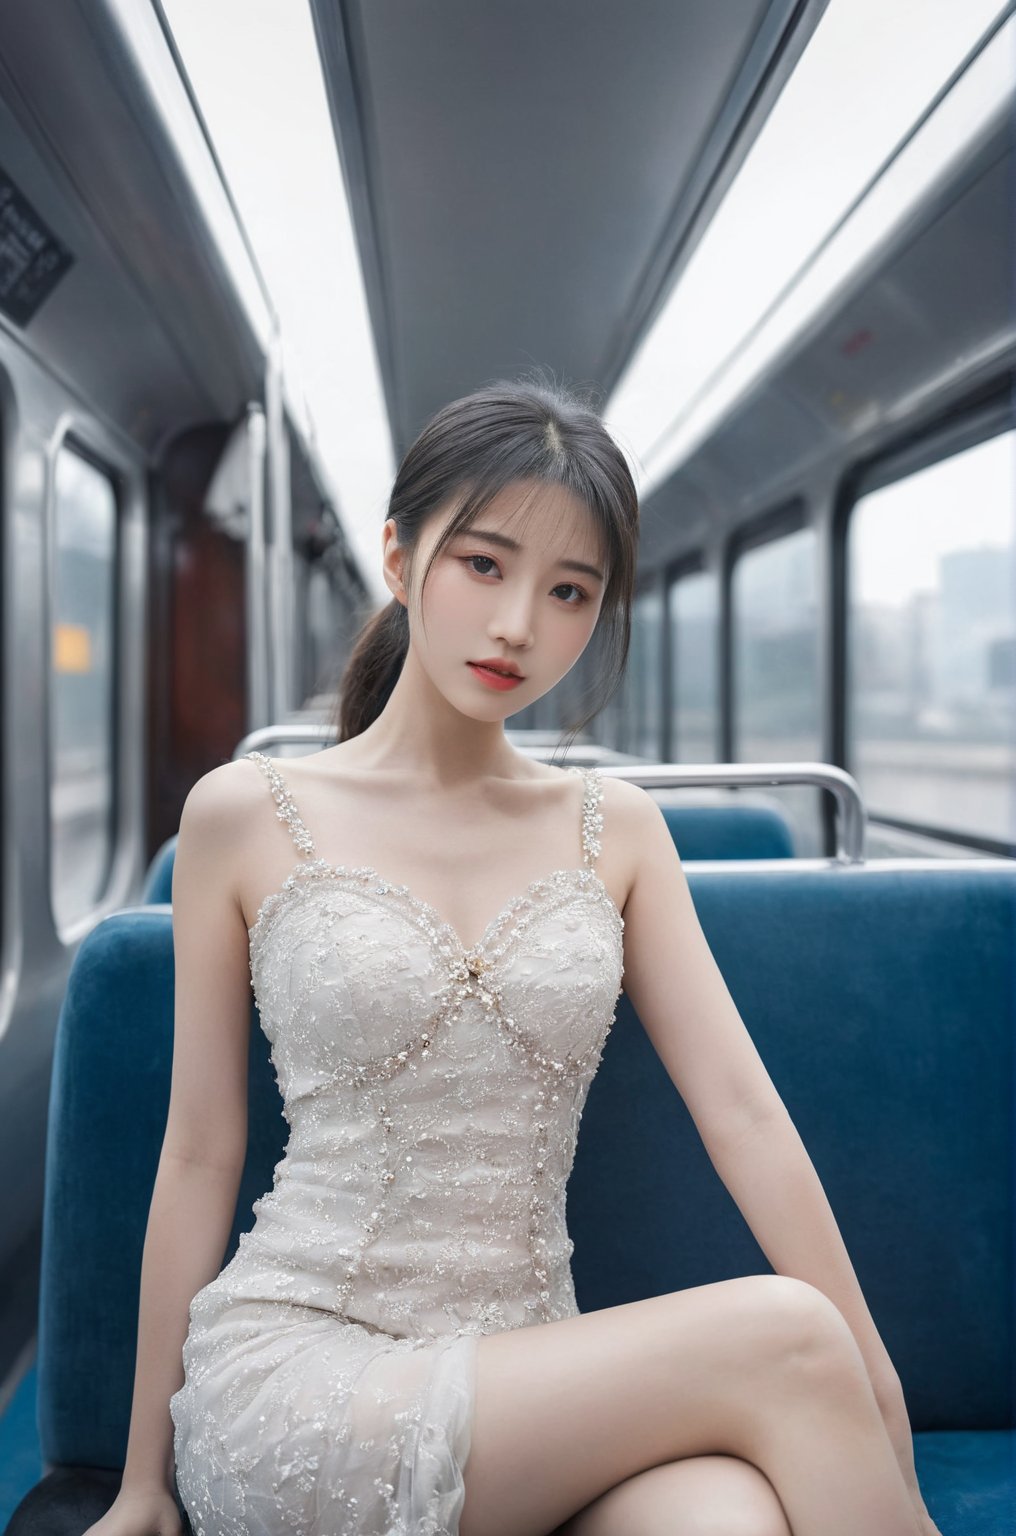 ultra-wide angle, depth of field, hyper detailed ,hubggirl,
Cinematic Photo of a beautiful Chinese fashion model bokeh train